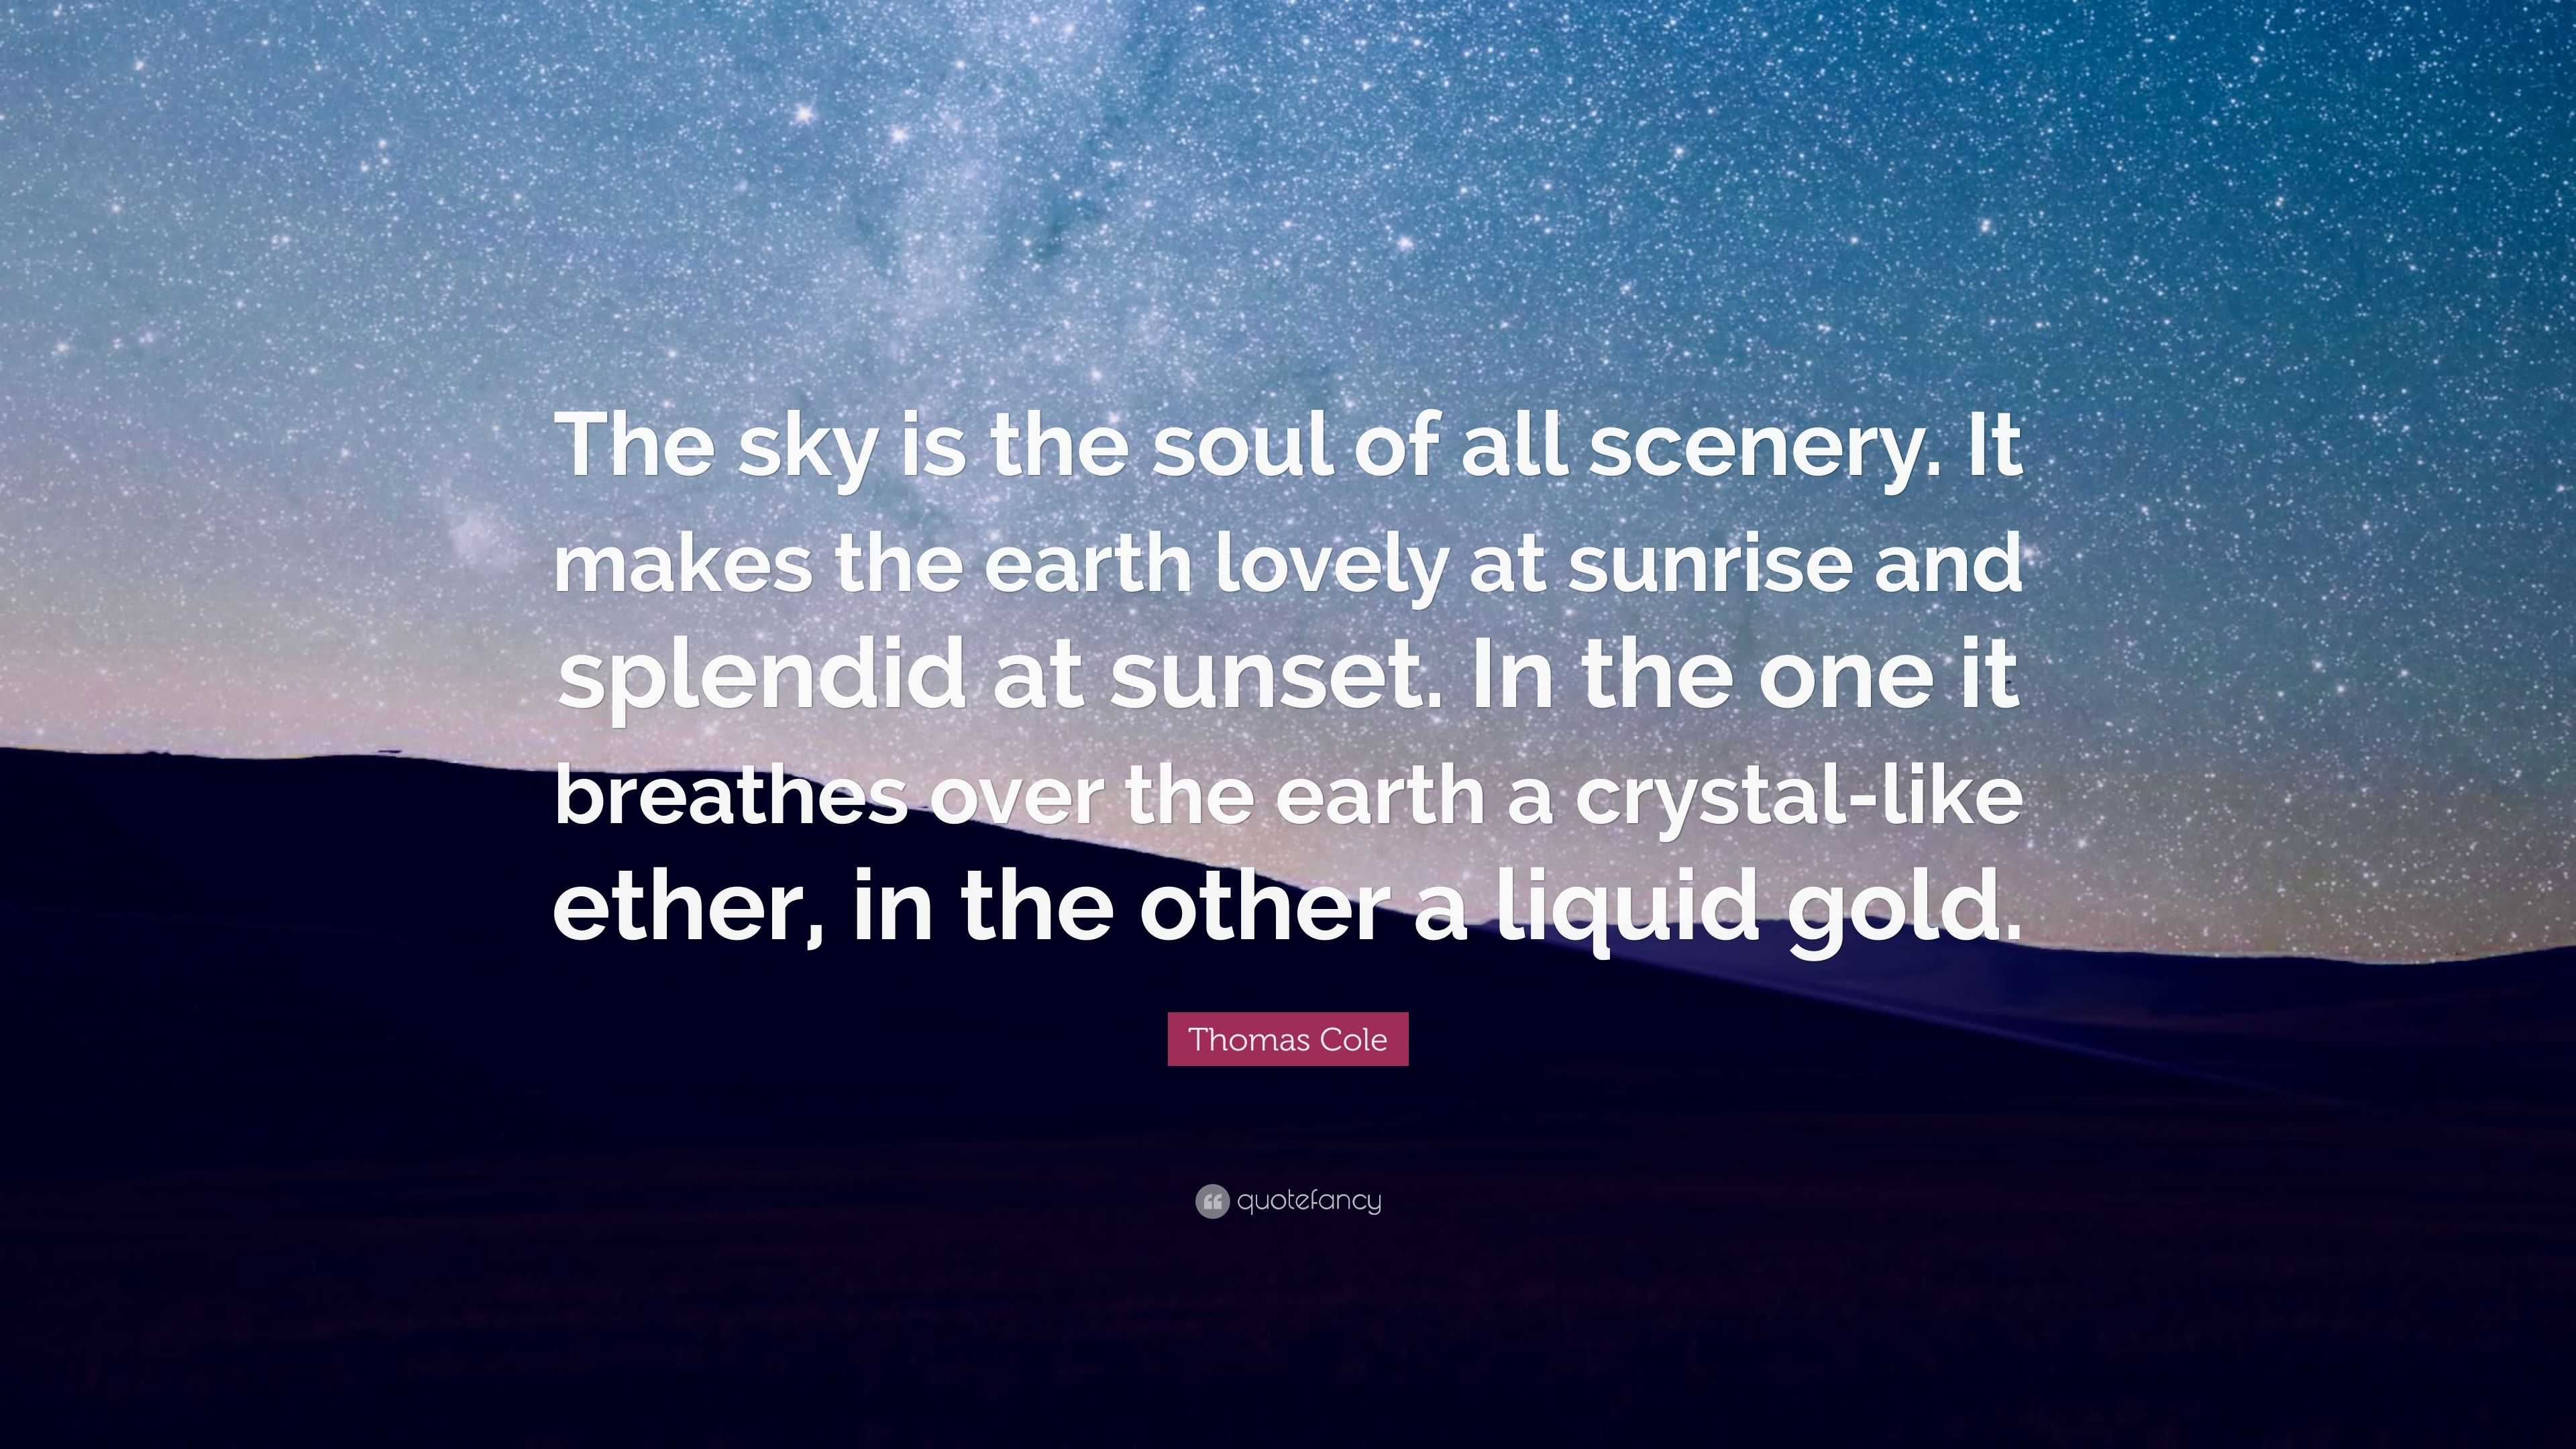 Thomas Cole Quote: “The sky is the soul of all scenery. It makes the ...